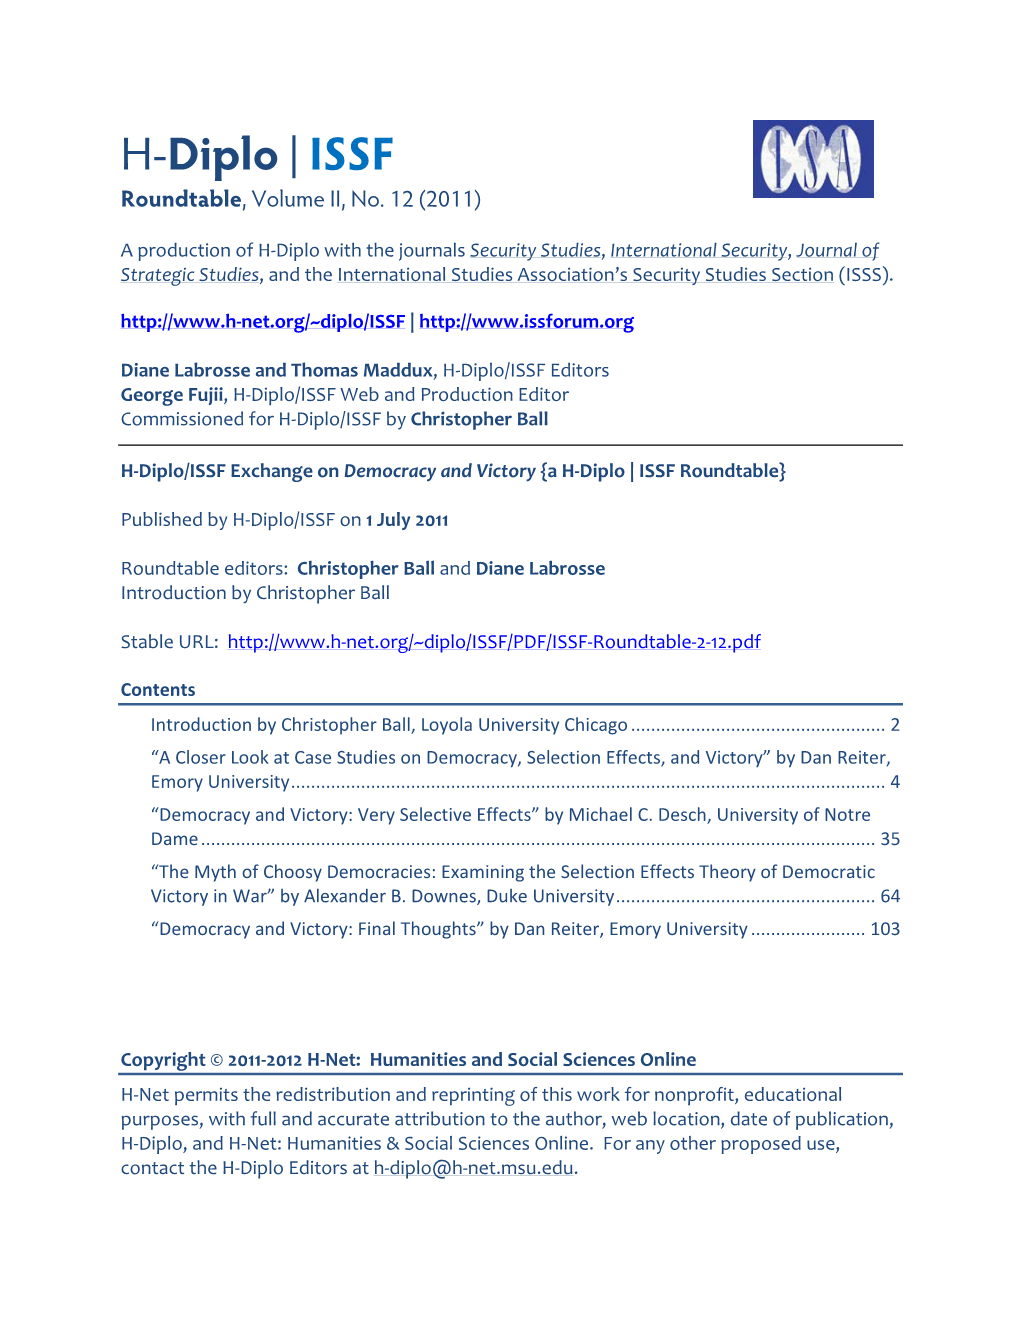 H-Diplo/ISSF Roundtable, Vol. 2, No. 11 (2011)